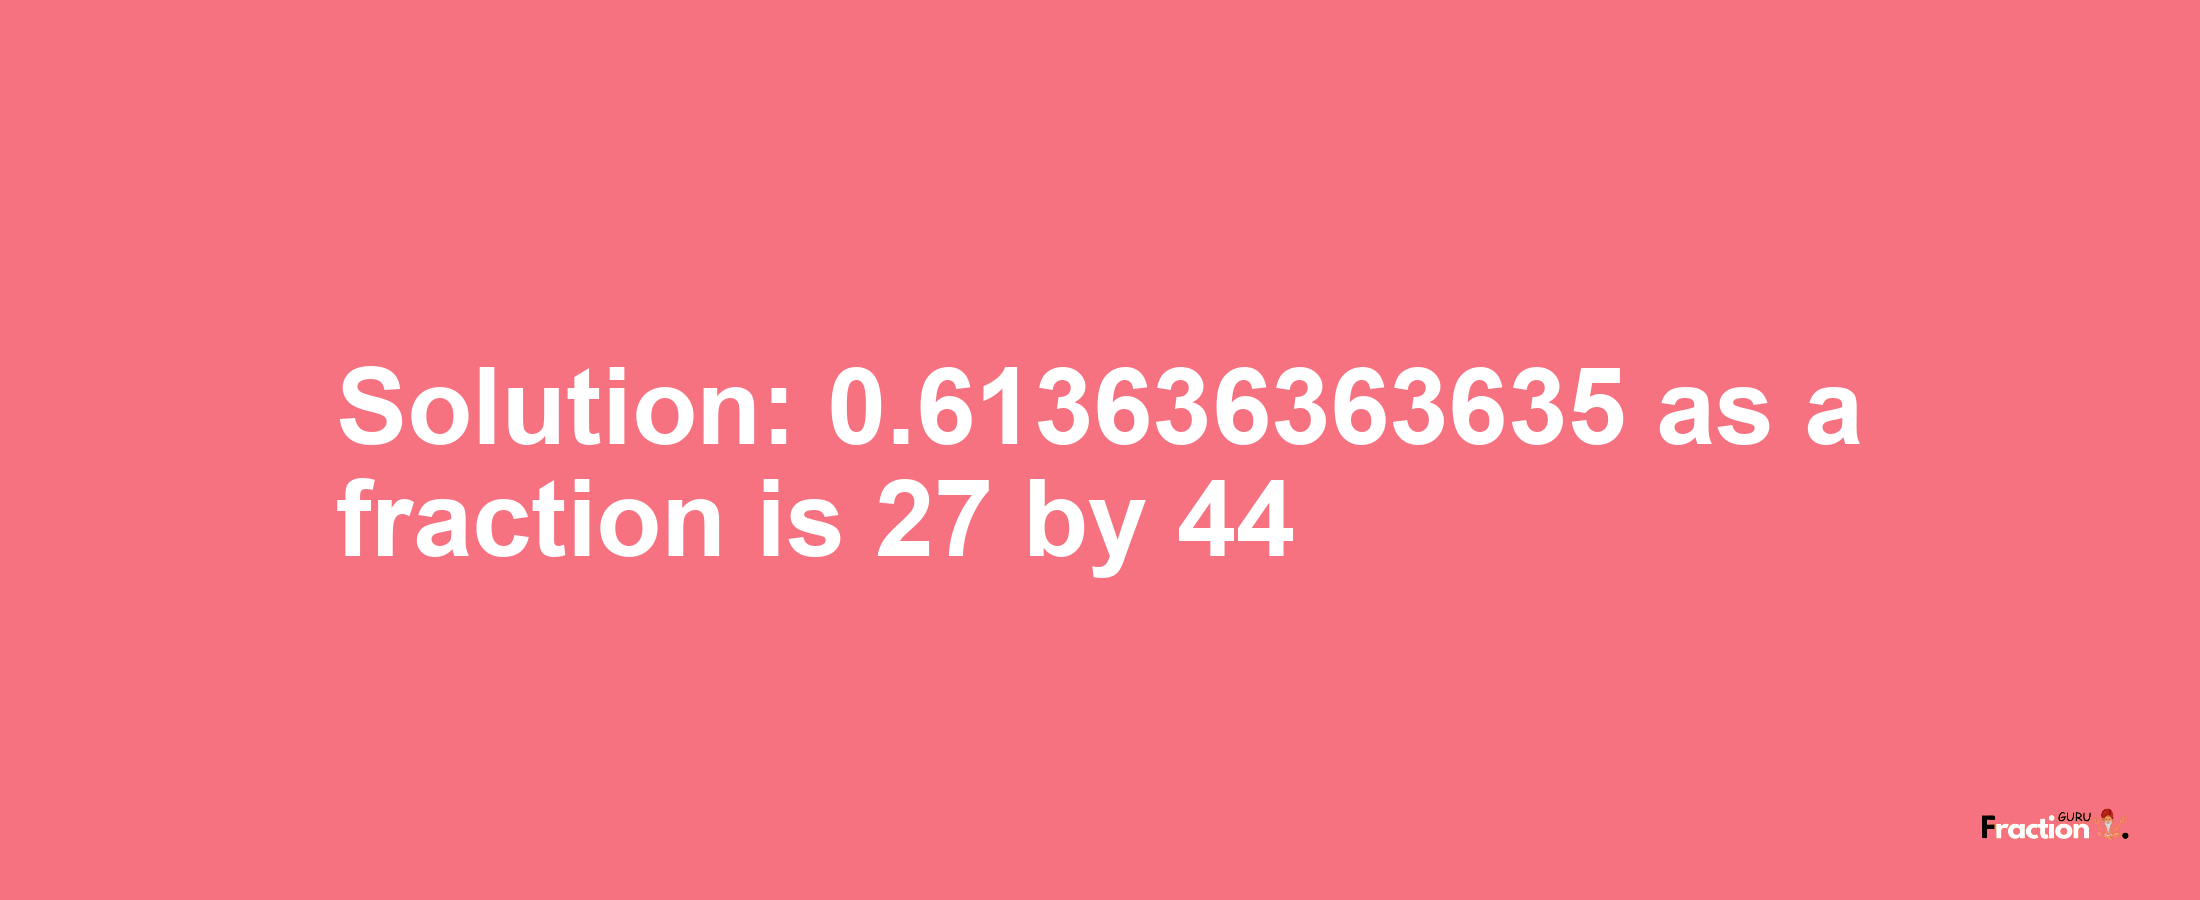 Solution:0.613636363635 as a fraction is 27/44